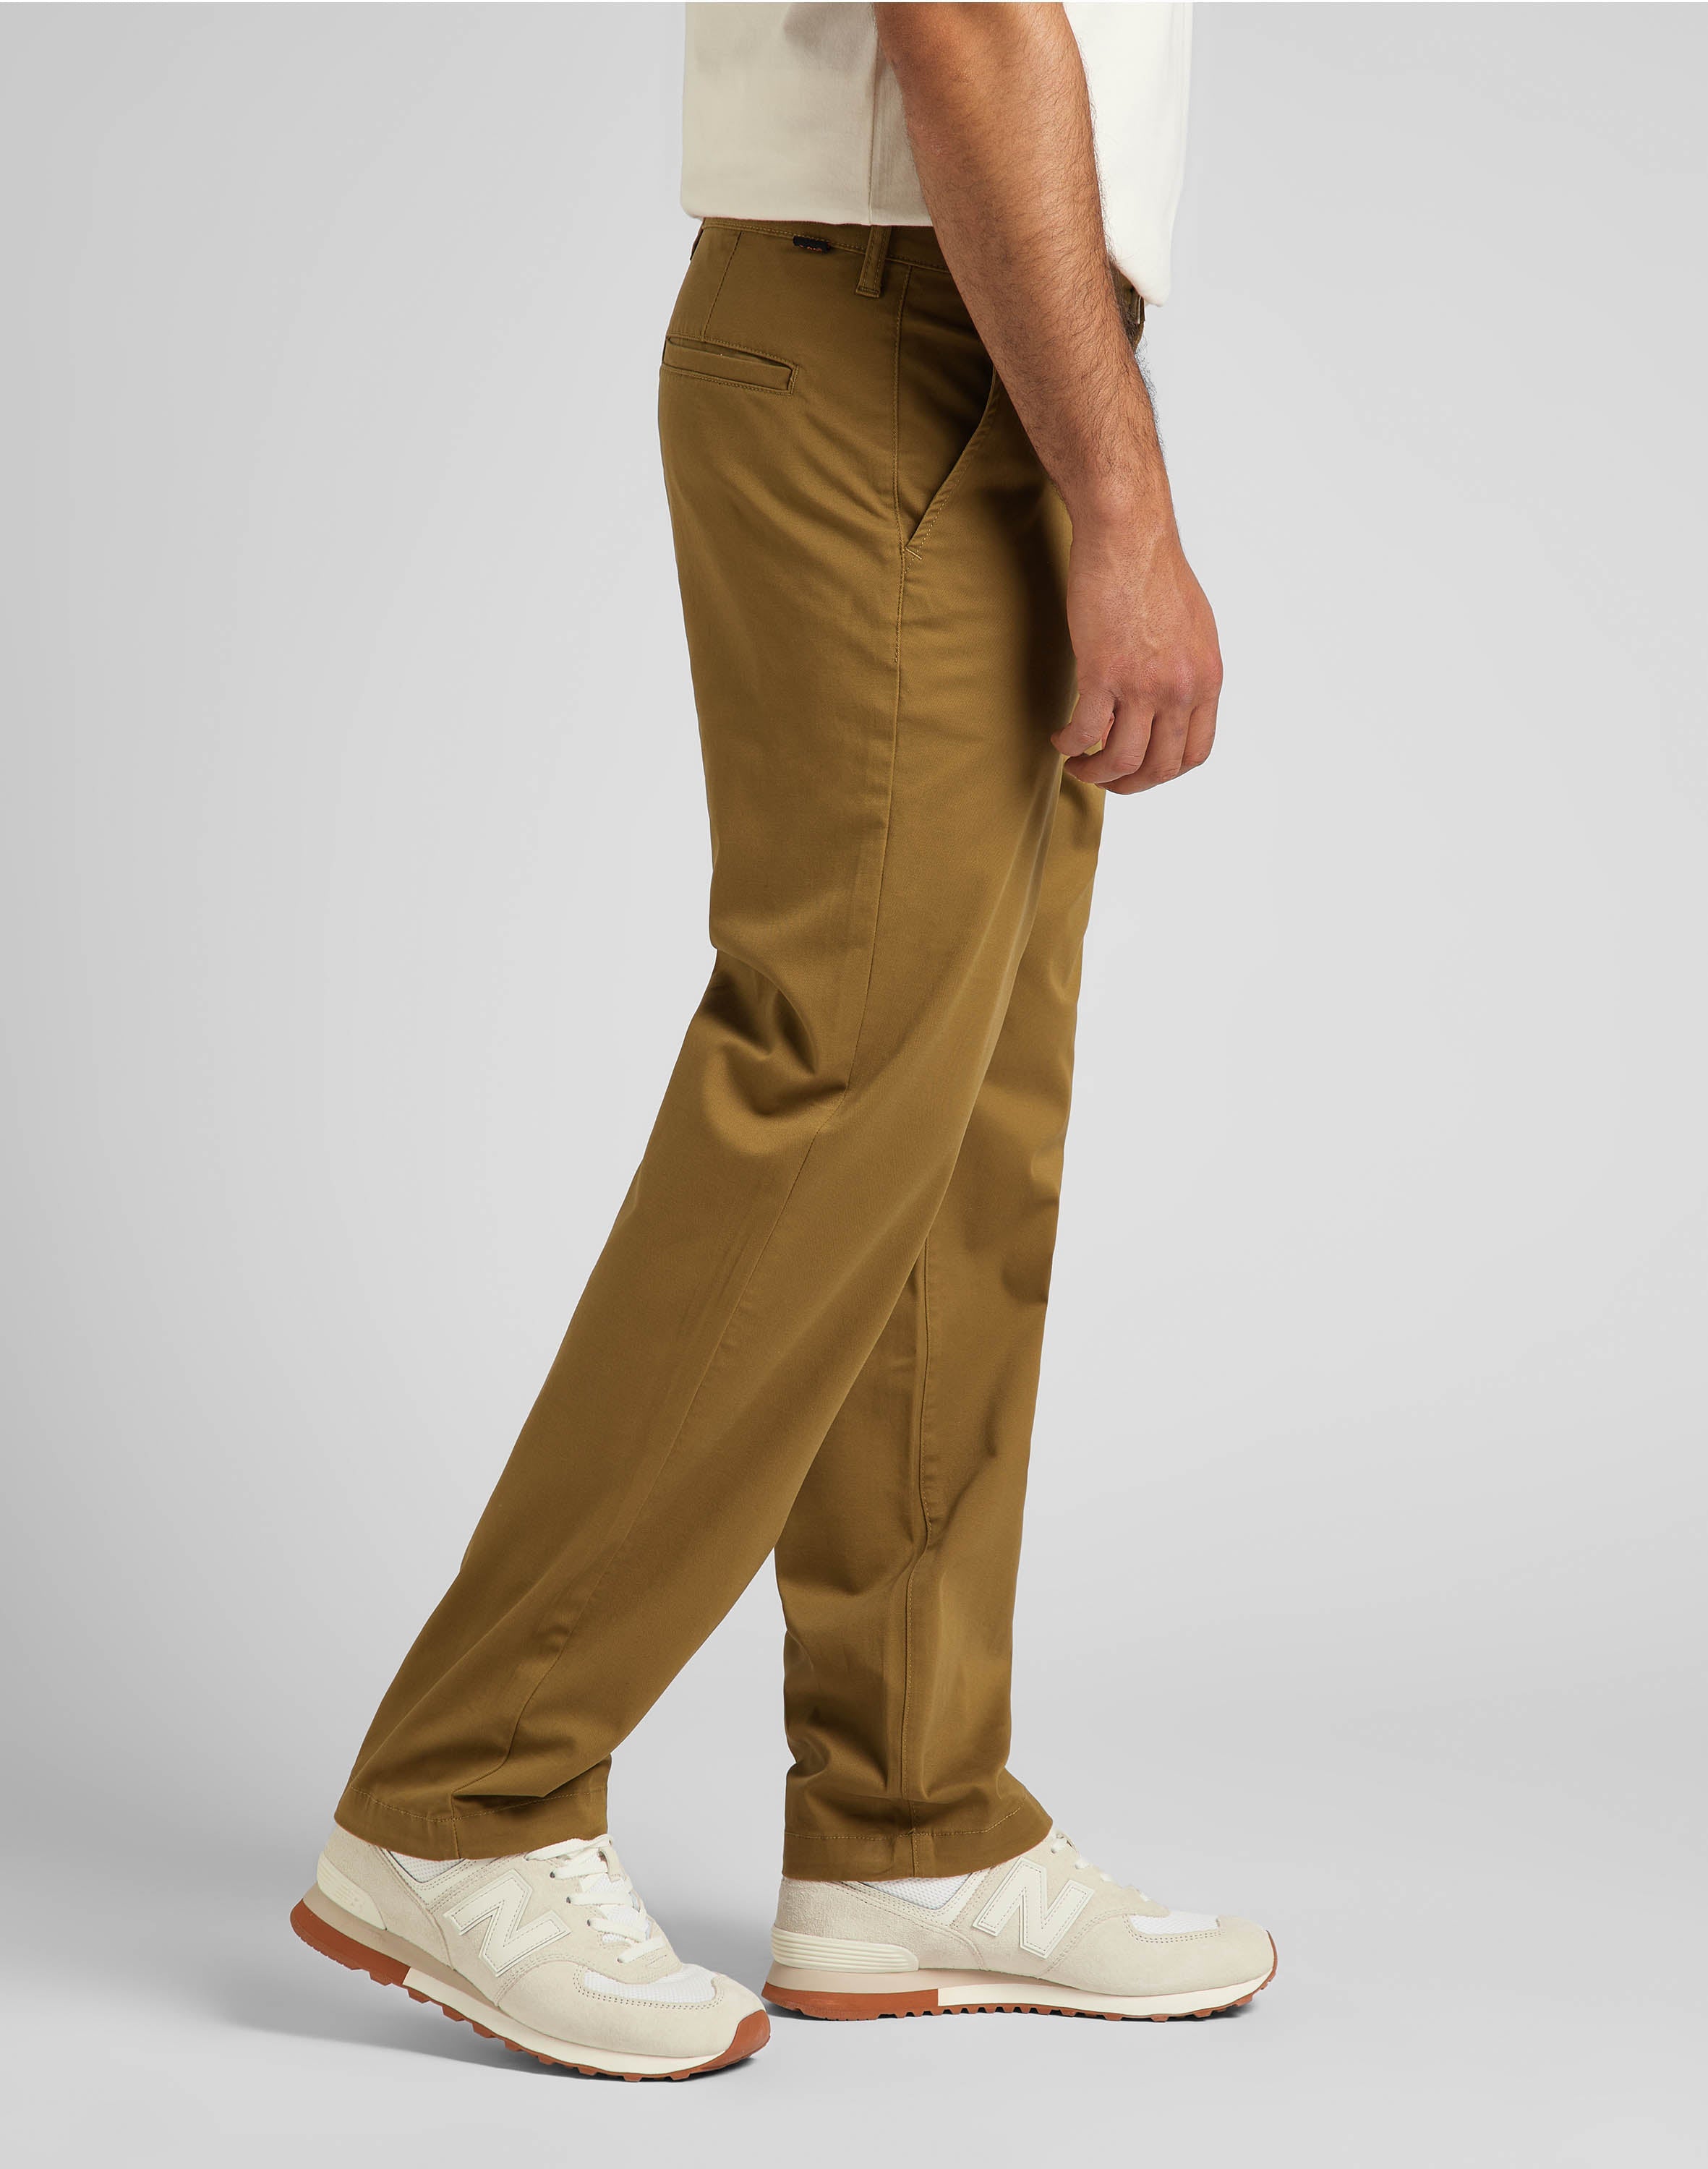 Relaxed Chino in Tumbleweed Chinos Lee   